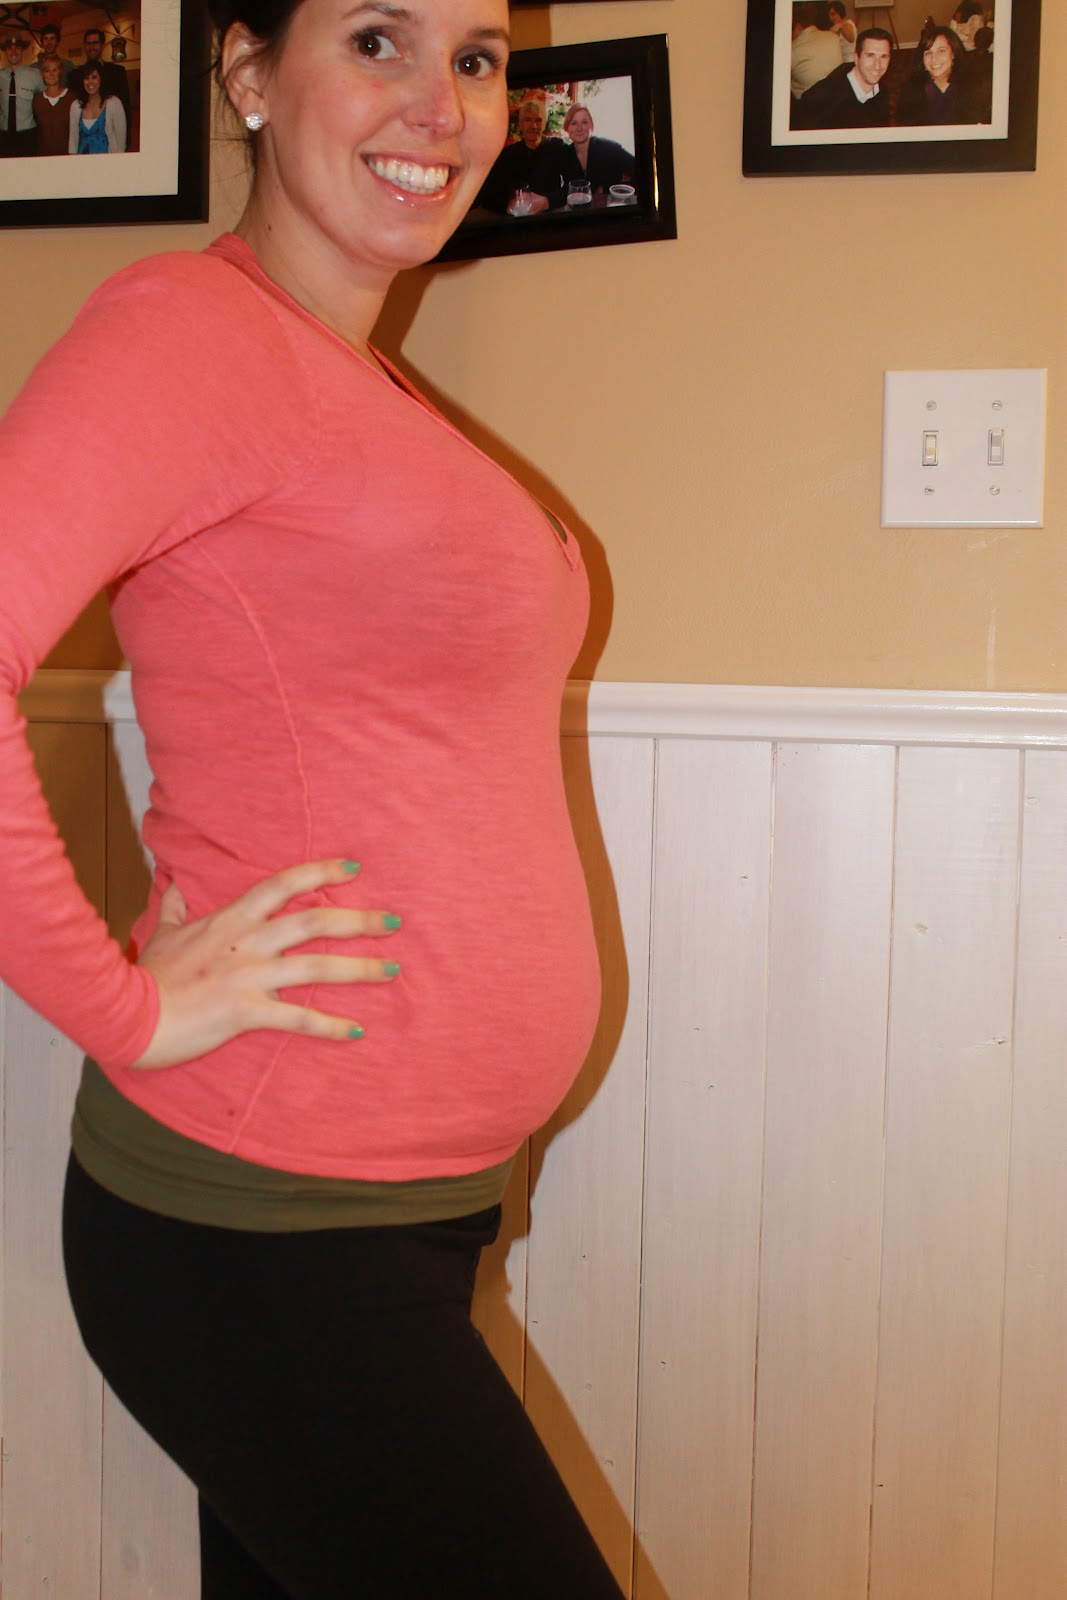 How Developed Is My Baby At 19 Weeks Pregnant